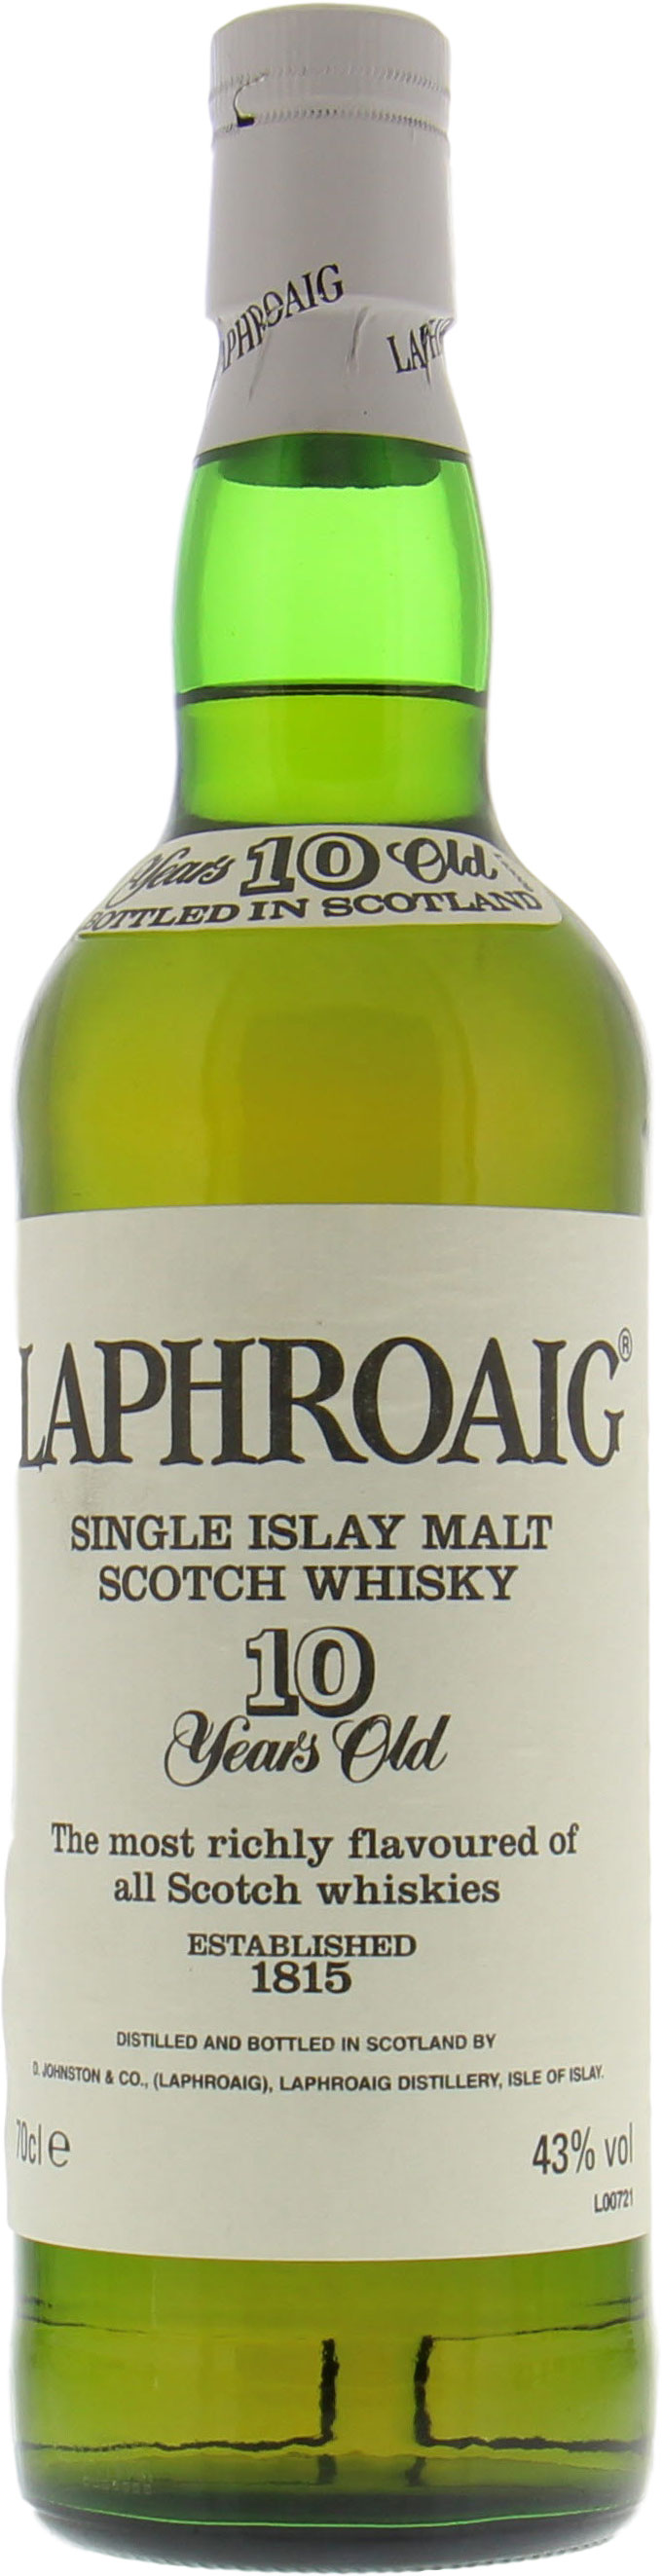 Laphroaig - 10 Years Old without feathered crest Badge 43% NV No Original Tube Included!